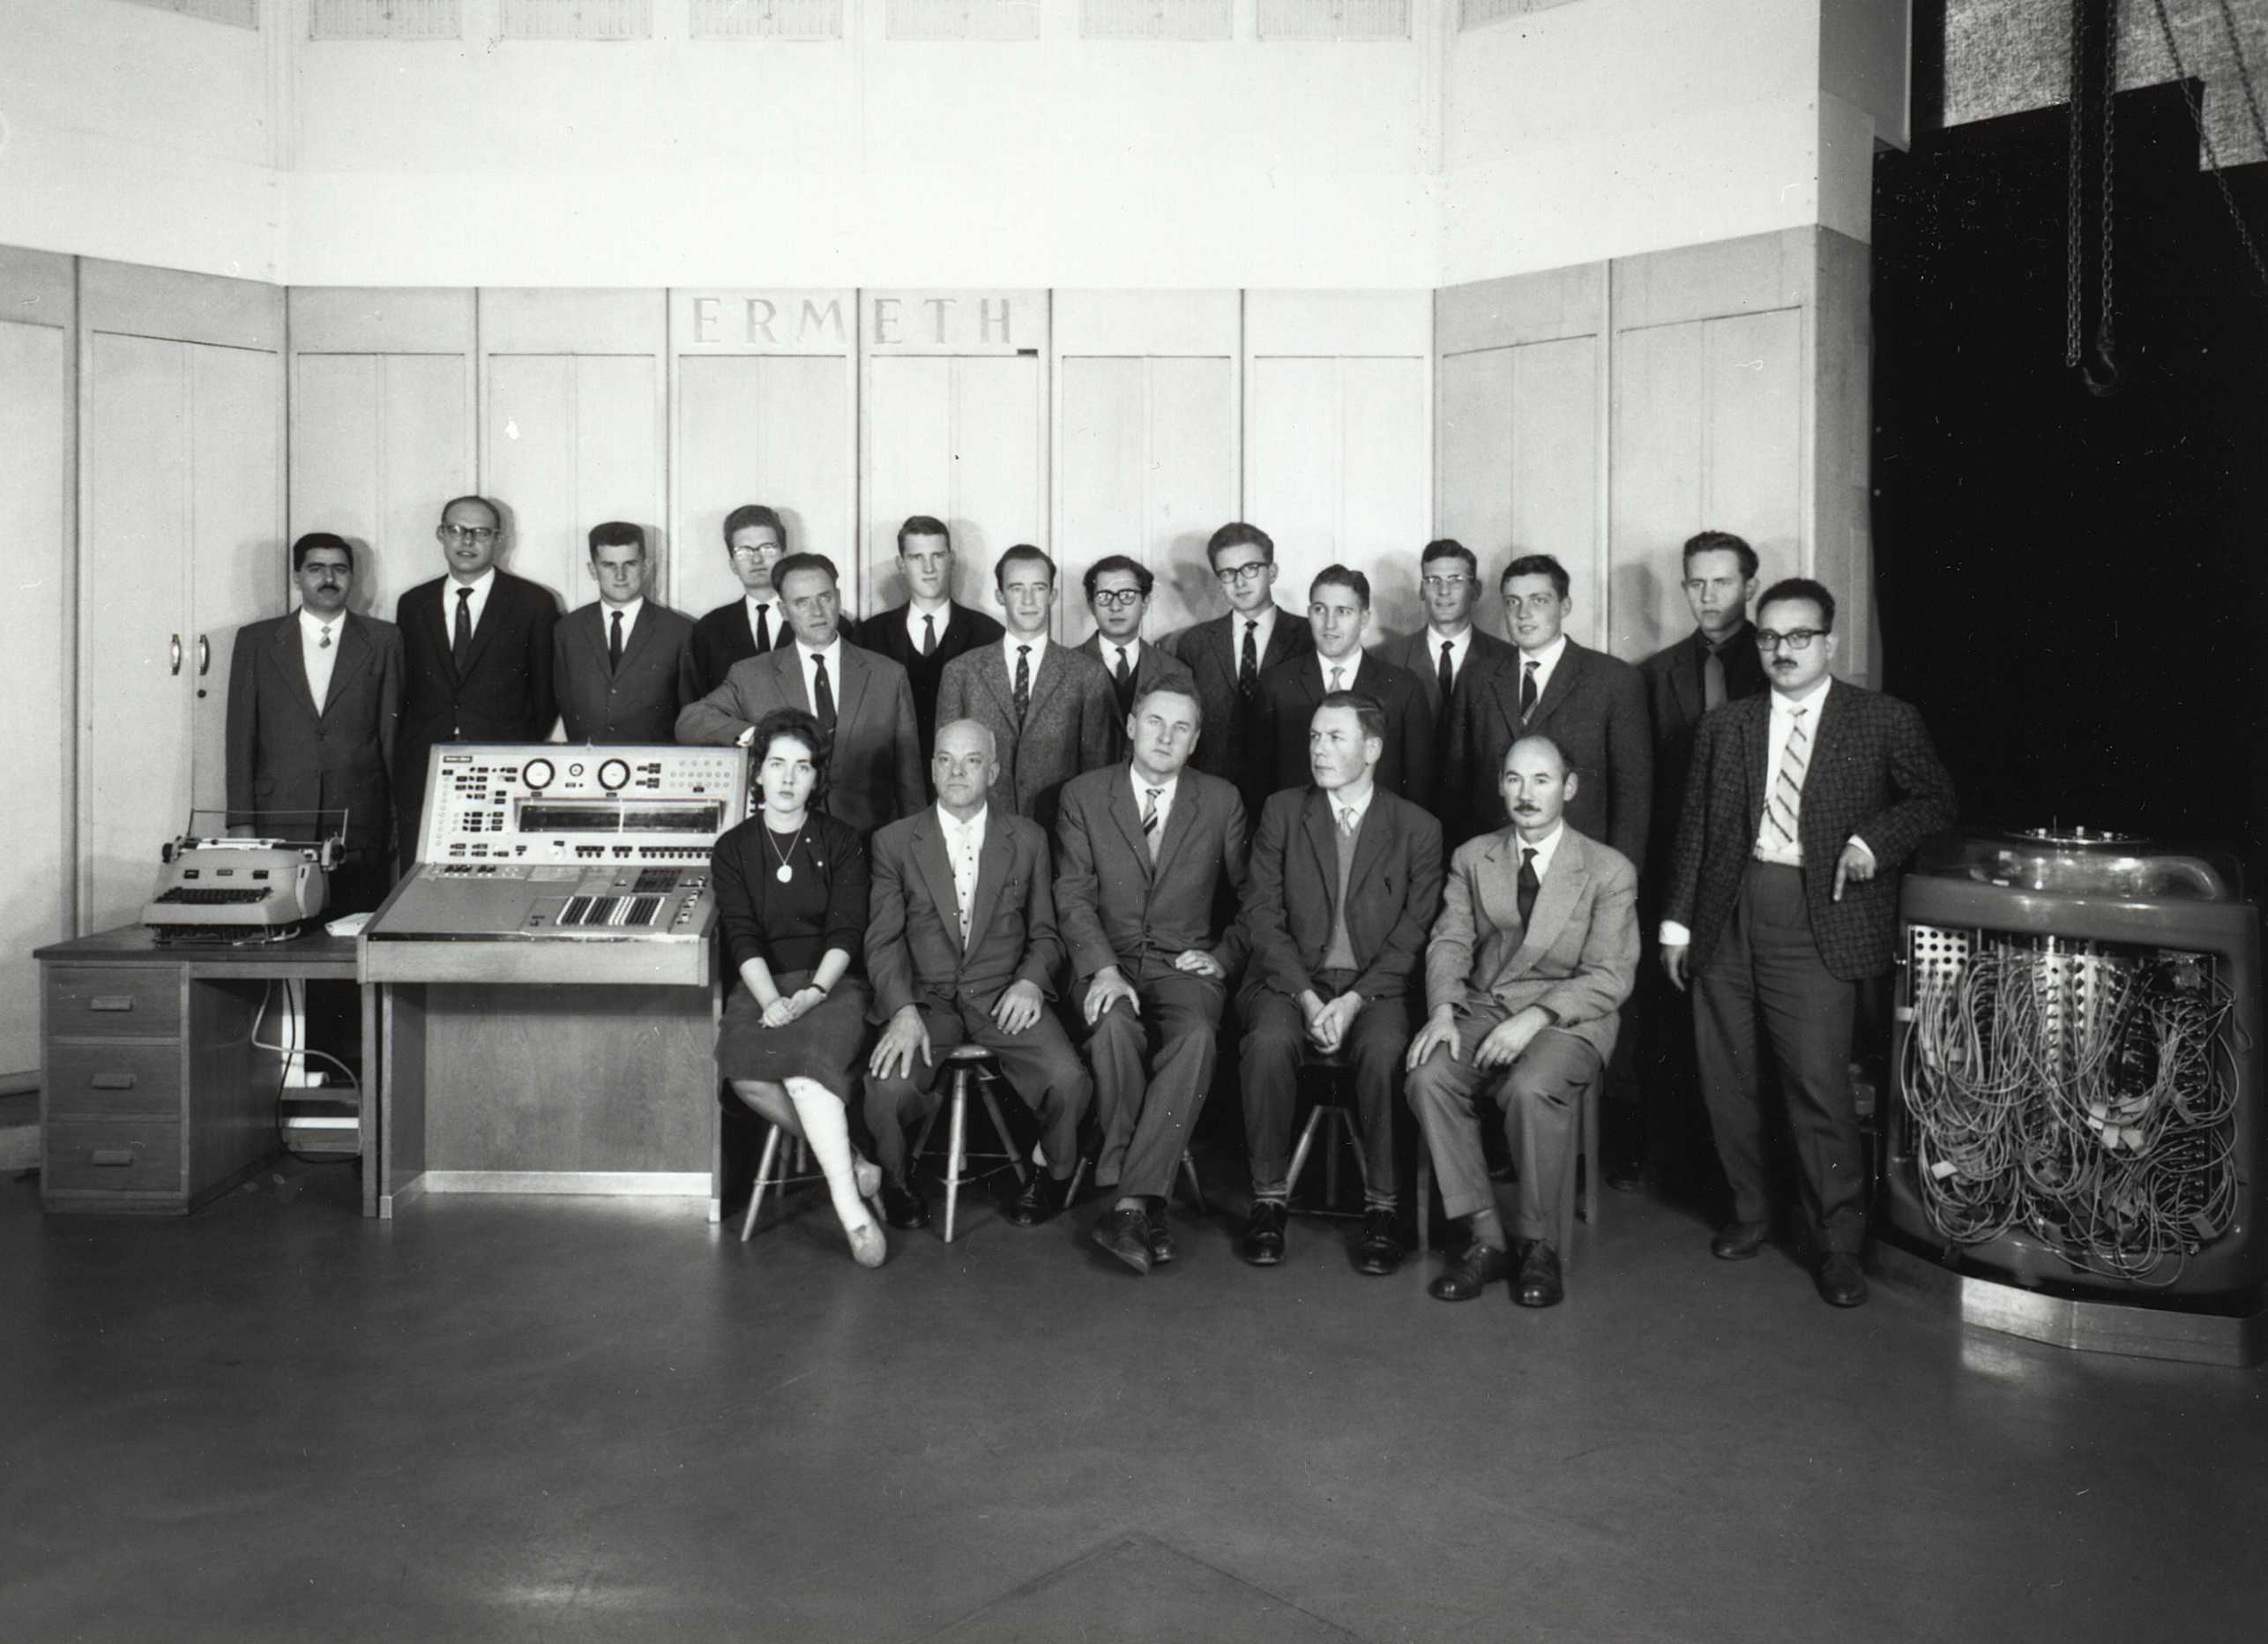 Enlarged view: Black and white photo of a group of people posing in front of tall wooden cabinets that read "ERMETH". On the left is an old console, on the right a large magnetic drum with many cables.